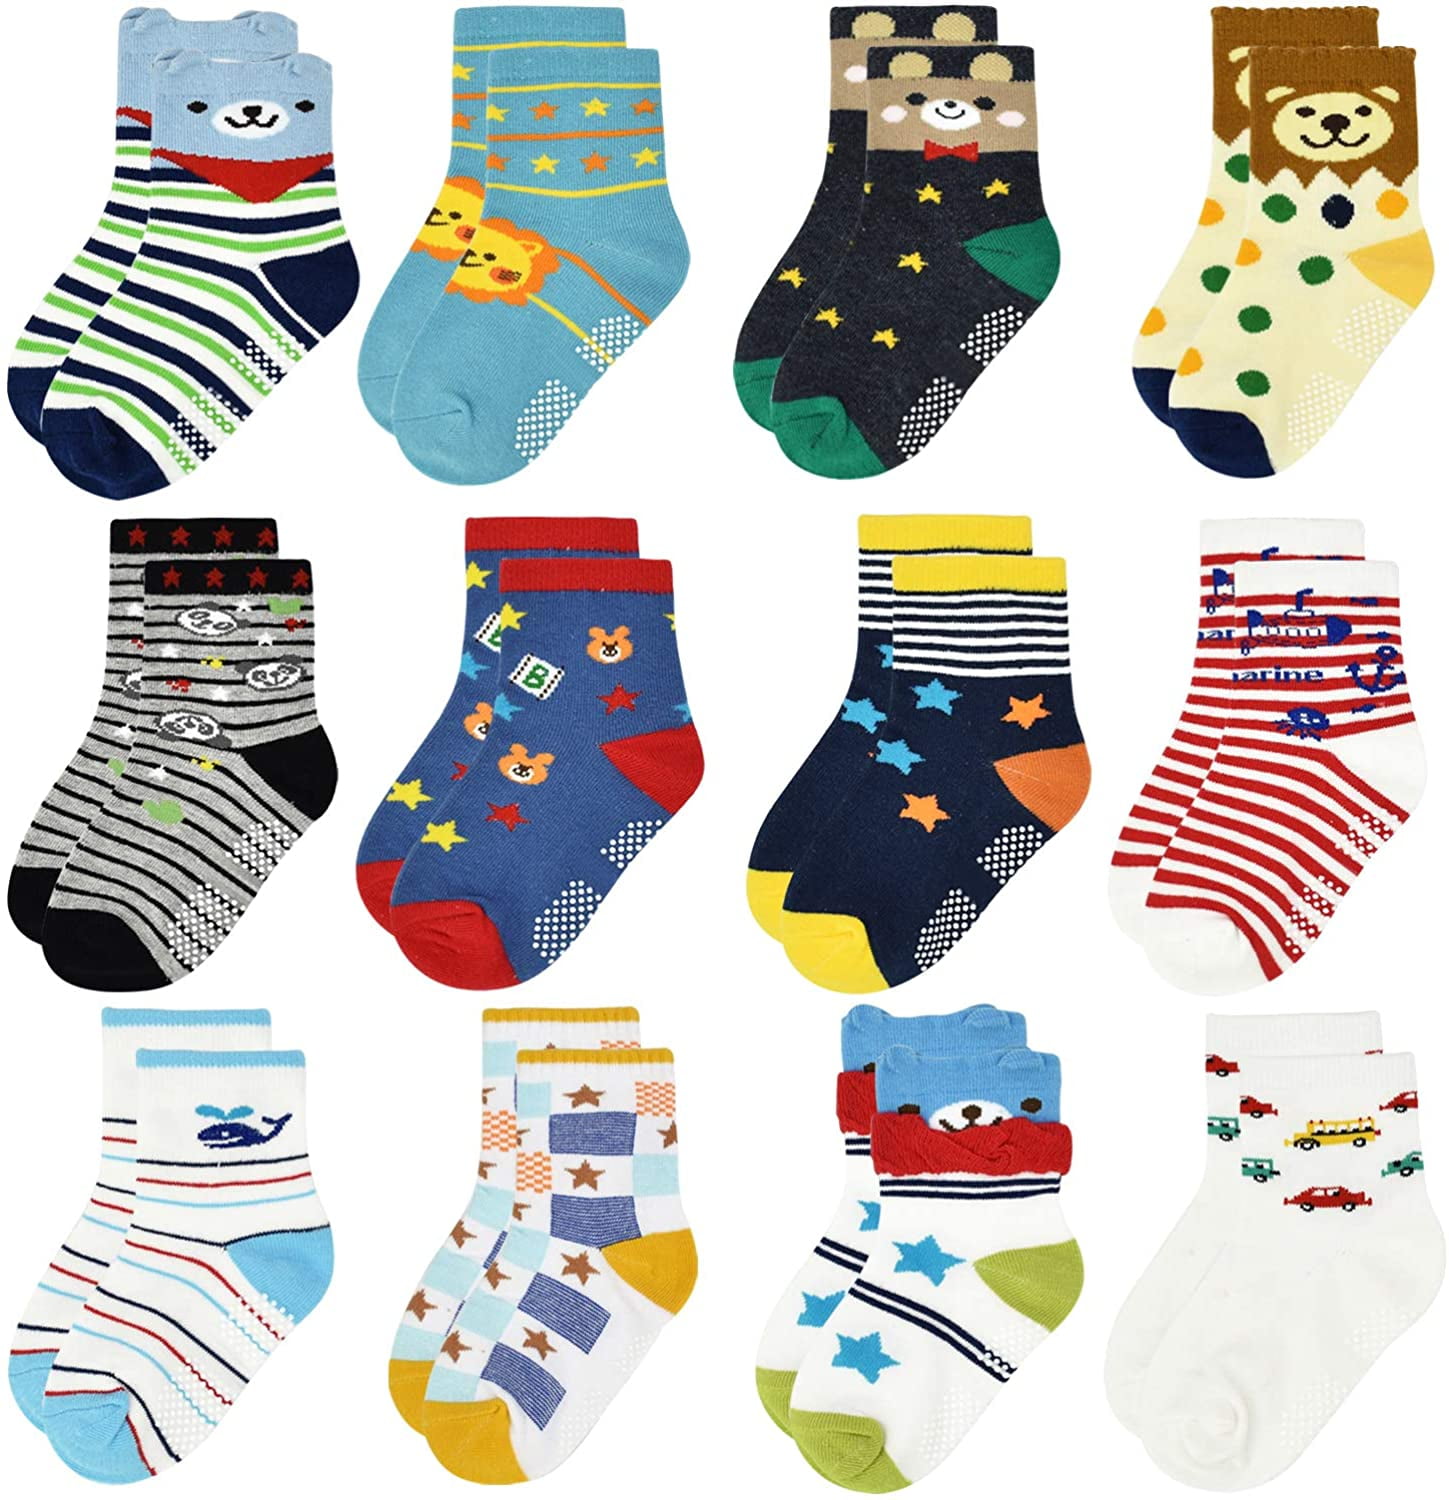 Baby Boys Anti-skid Socks 12 Pairs Toddler Boy Non Skid Socks Cute Cotton with Grips